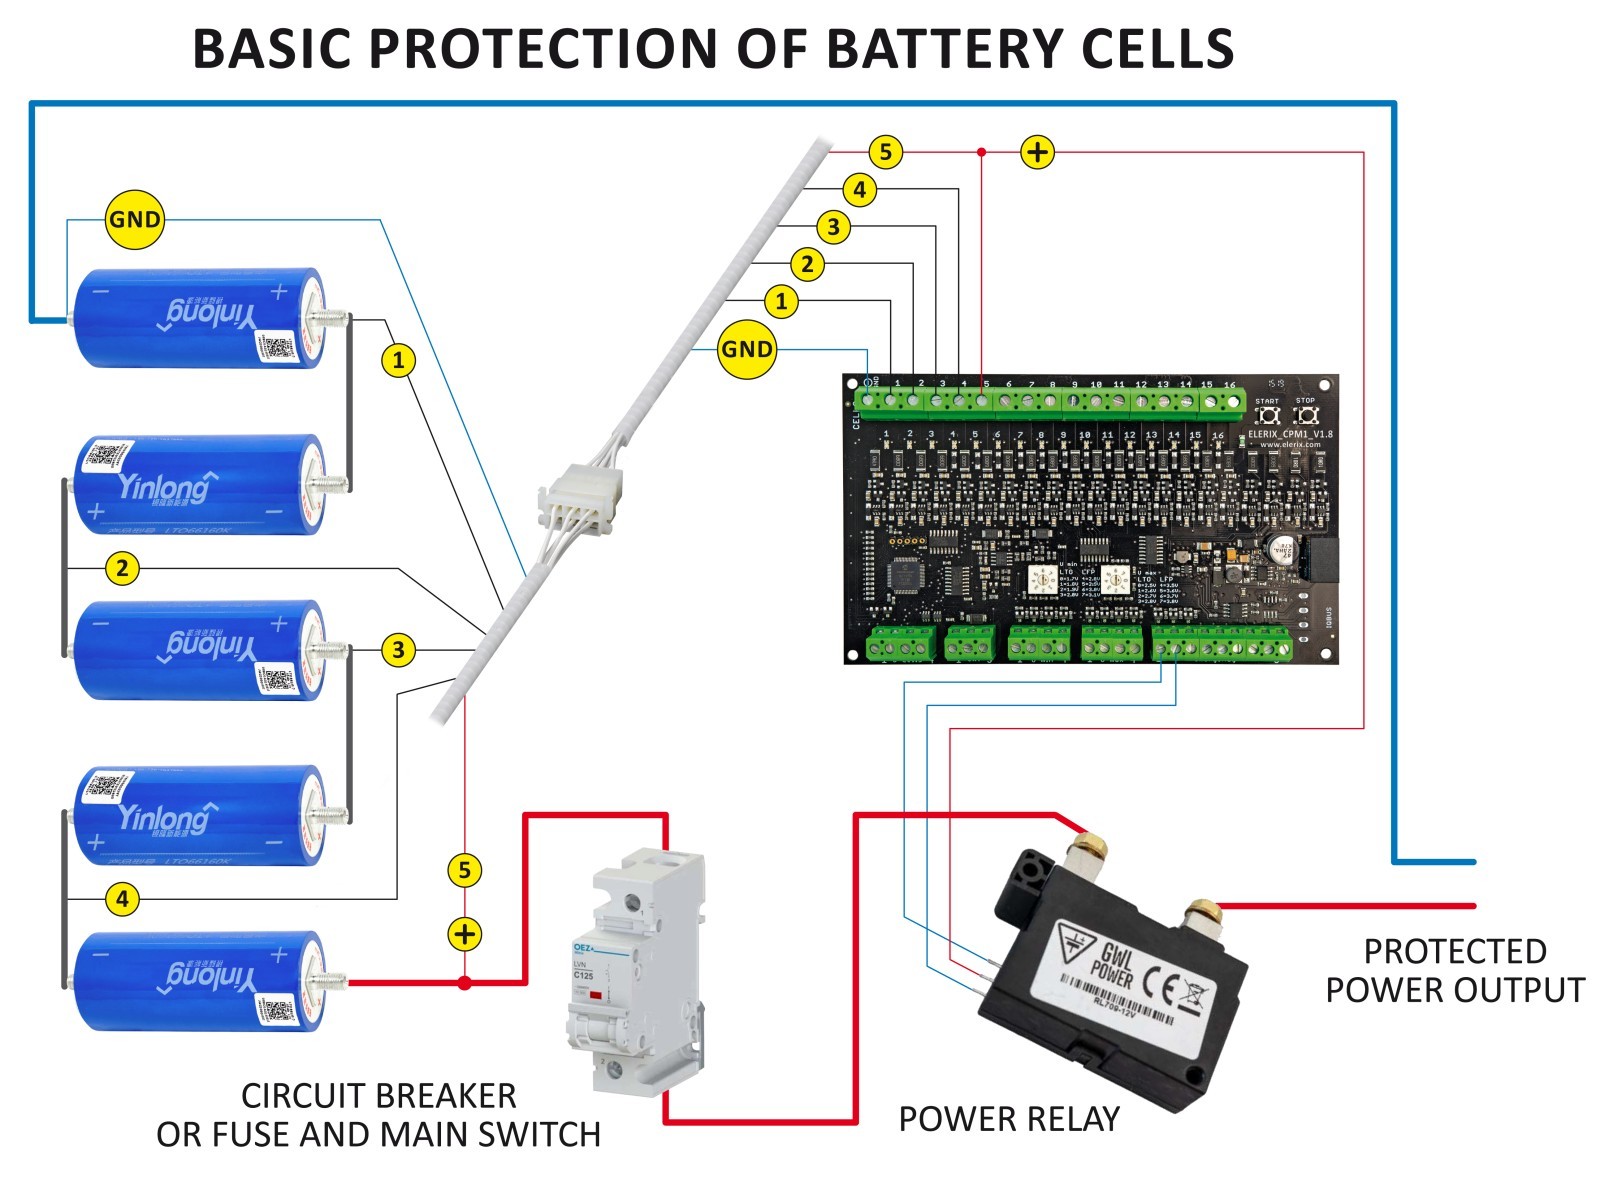 The Basic Protection of the Battery Cells